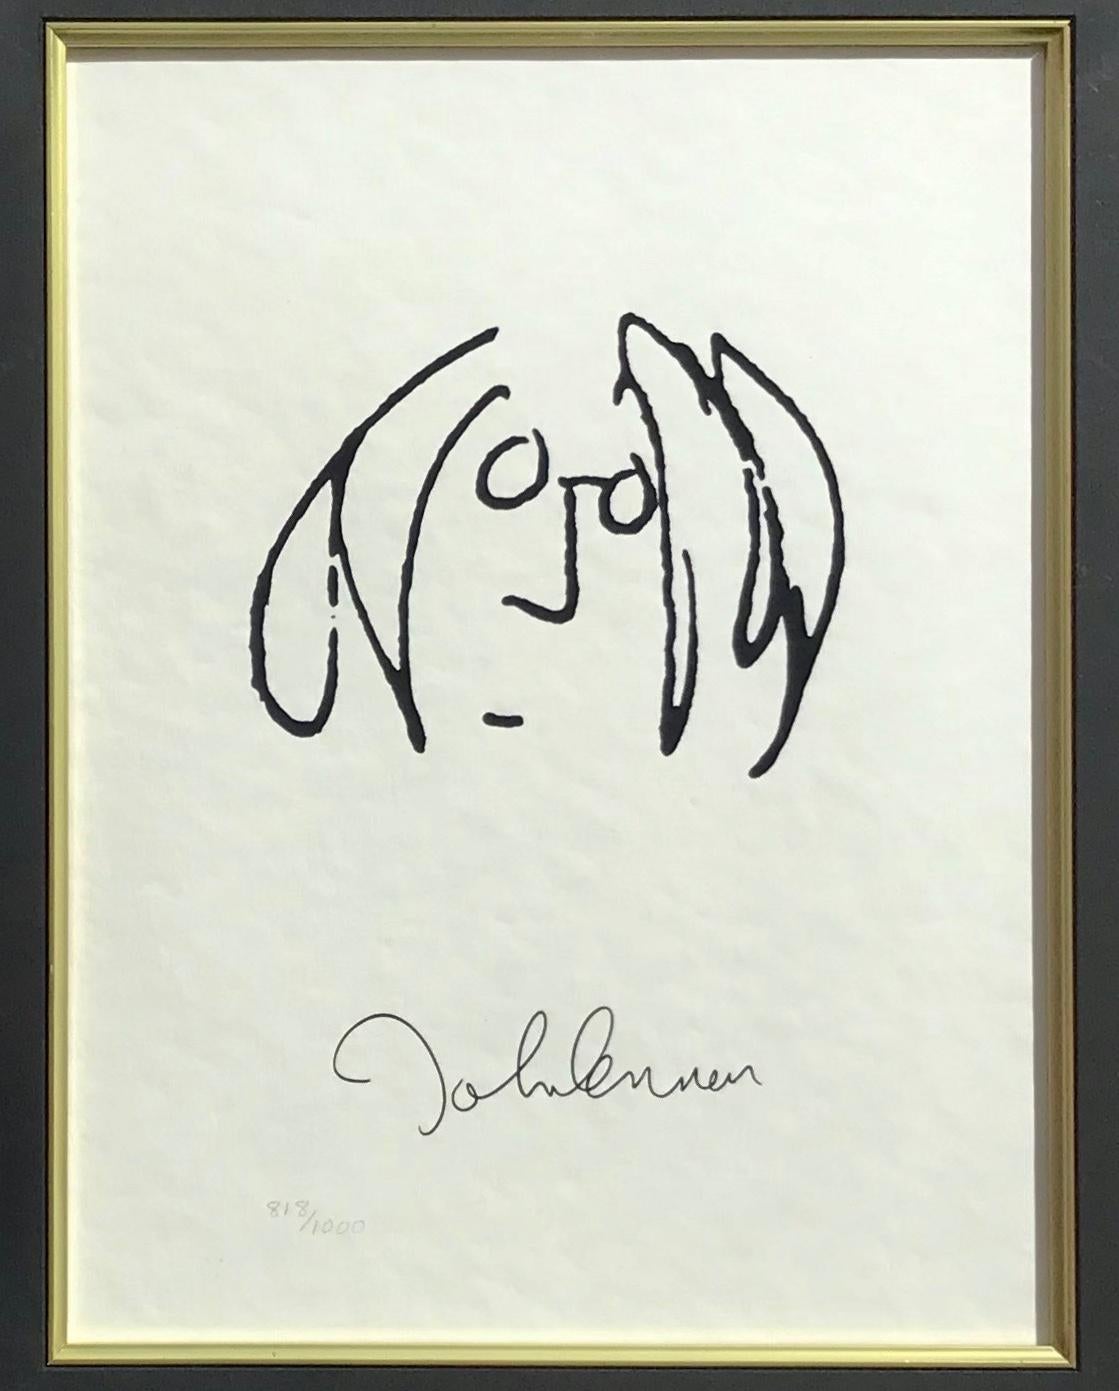 In My Life and Lennon Self Portrait Individually framed  - Print by John Lennon